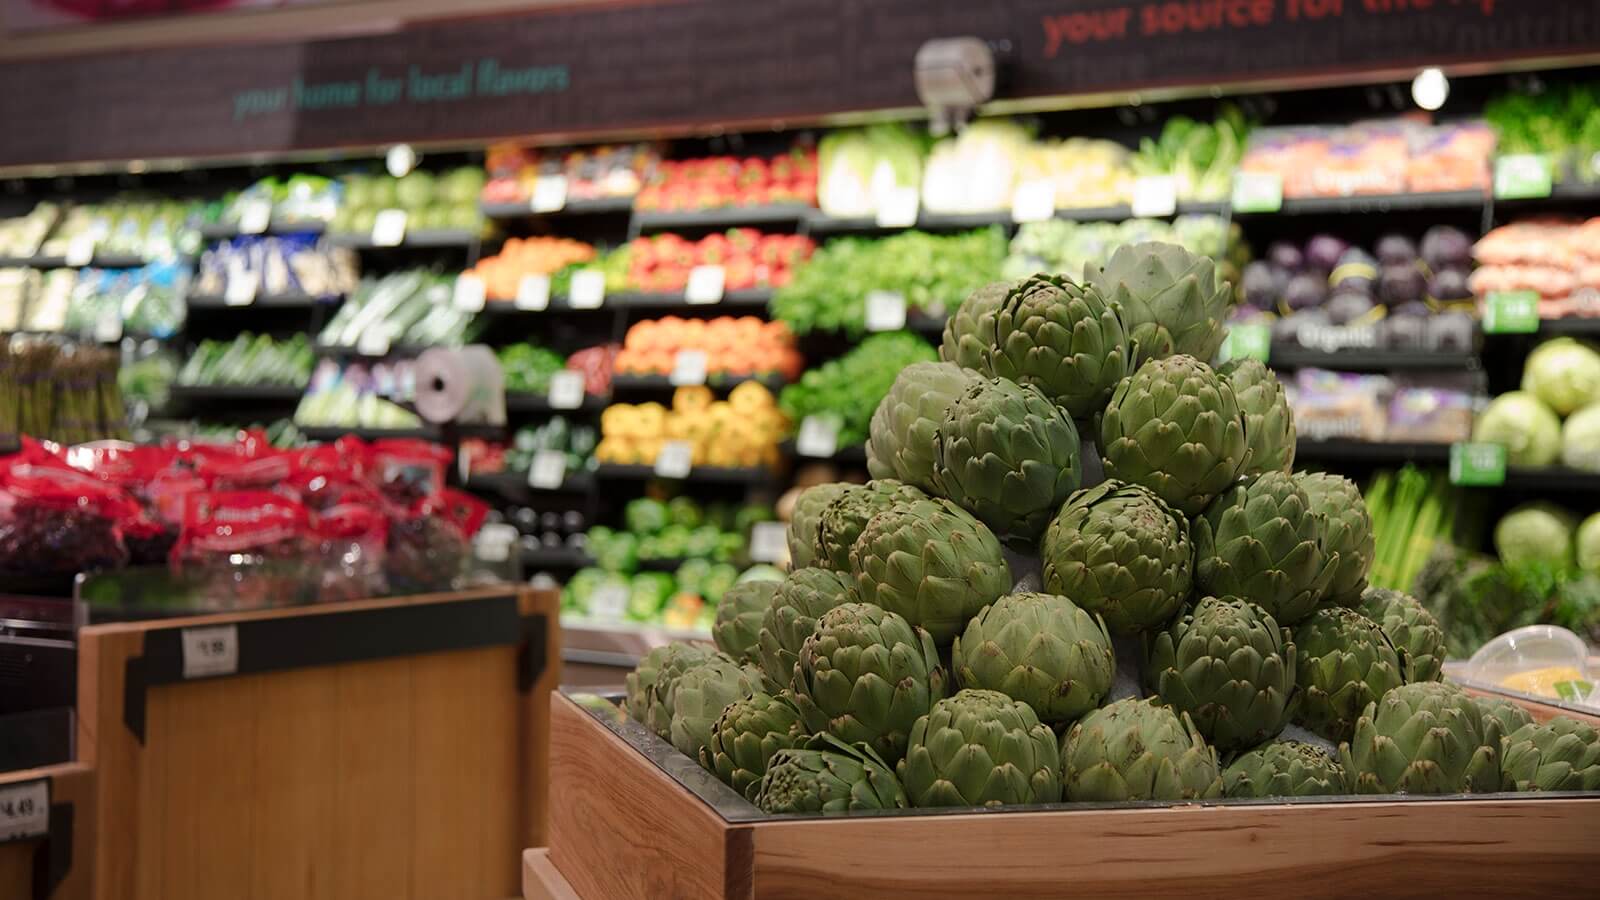 Weekly Features at The Fresh Market